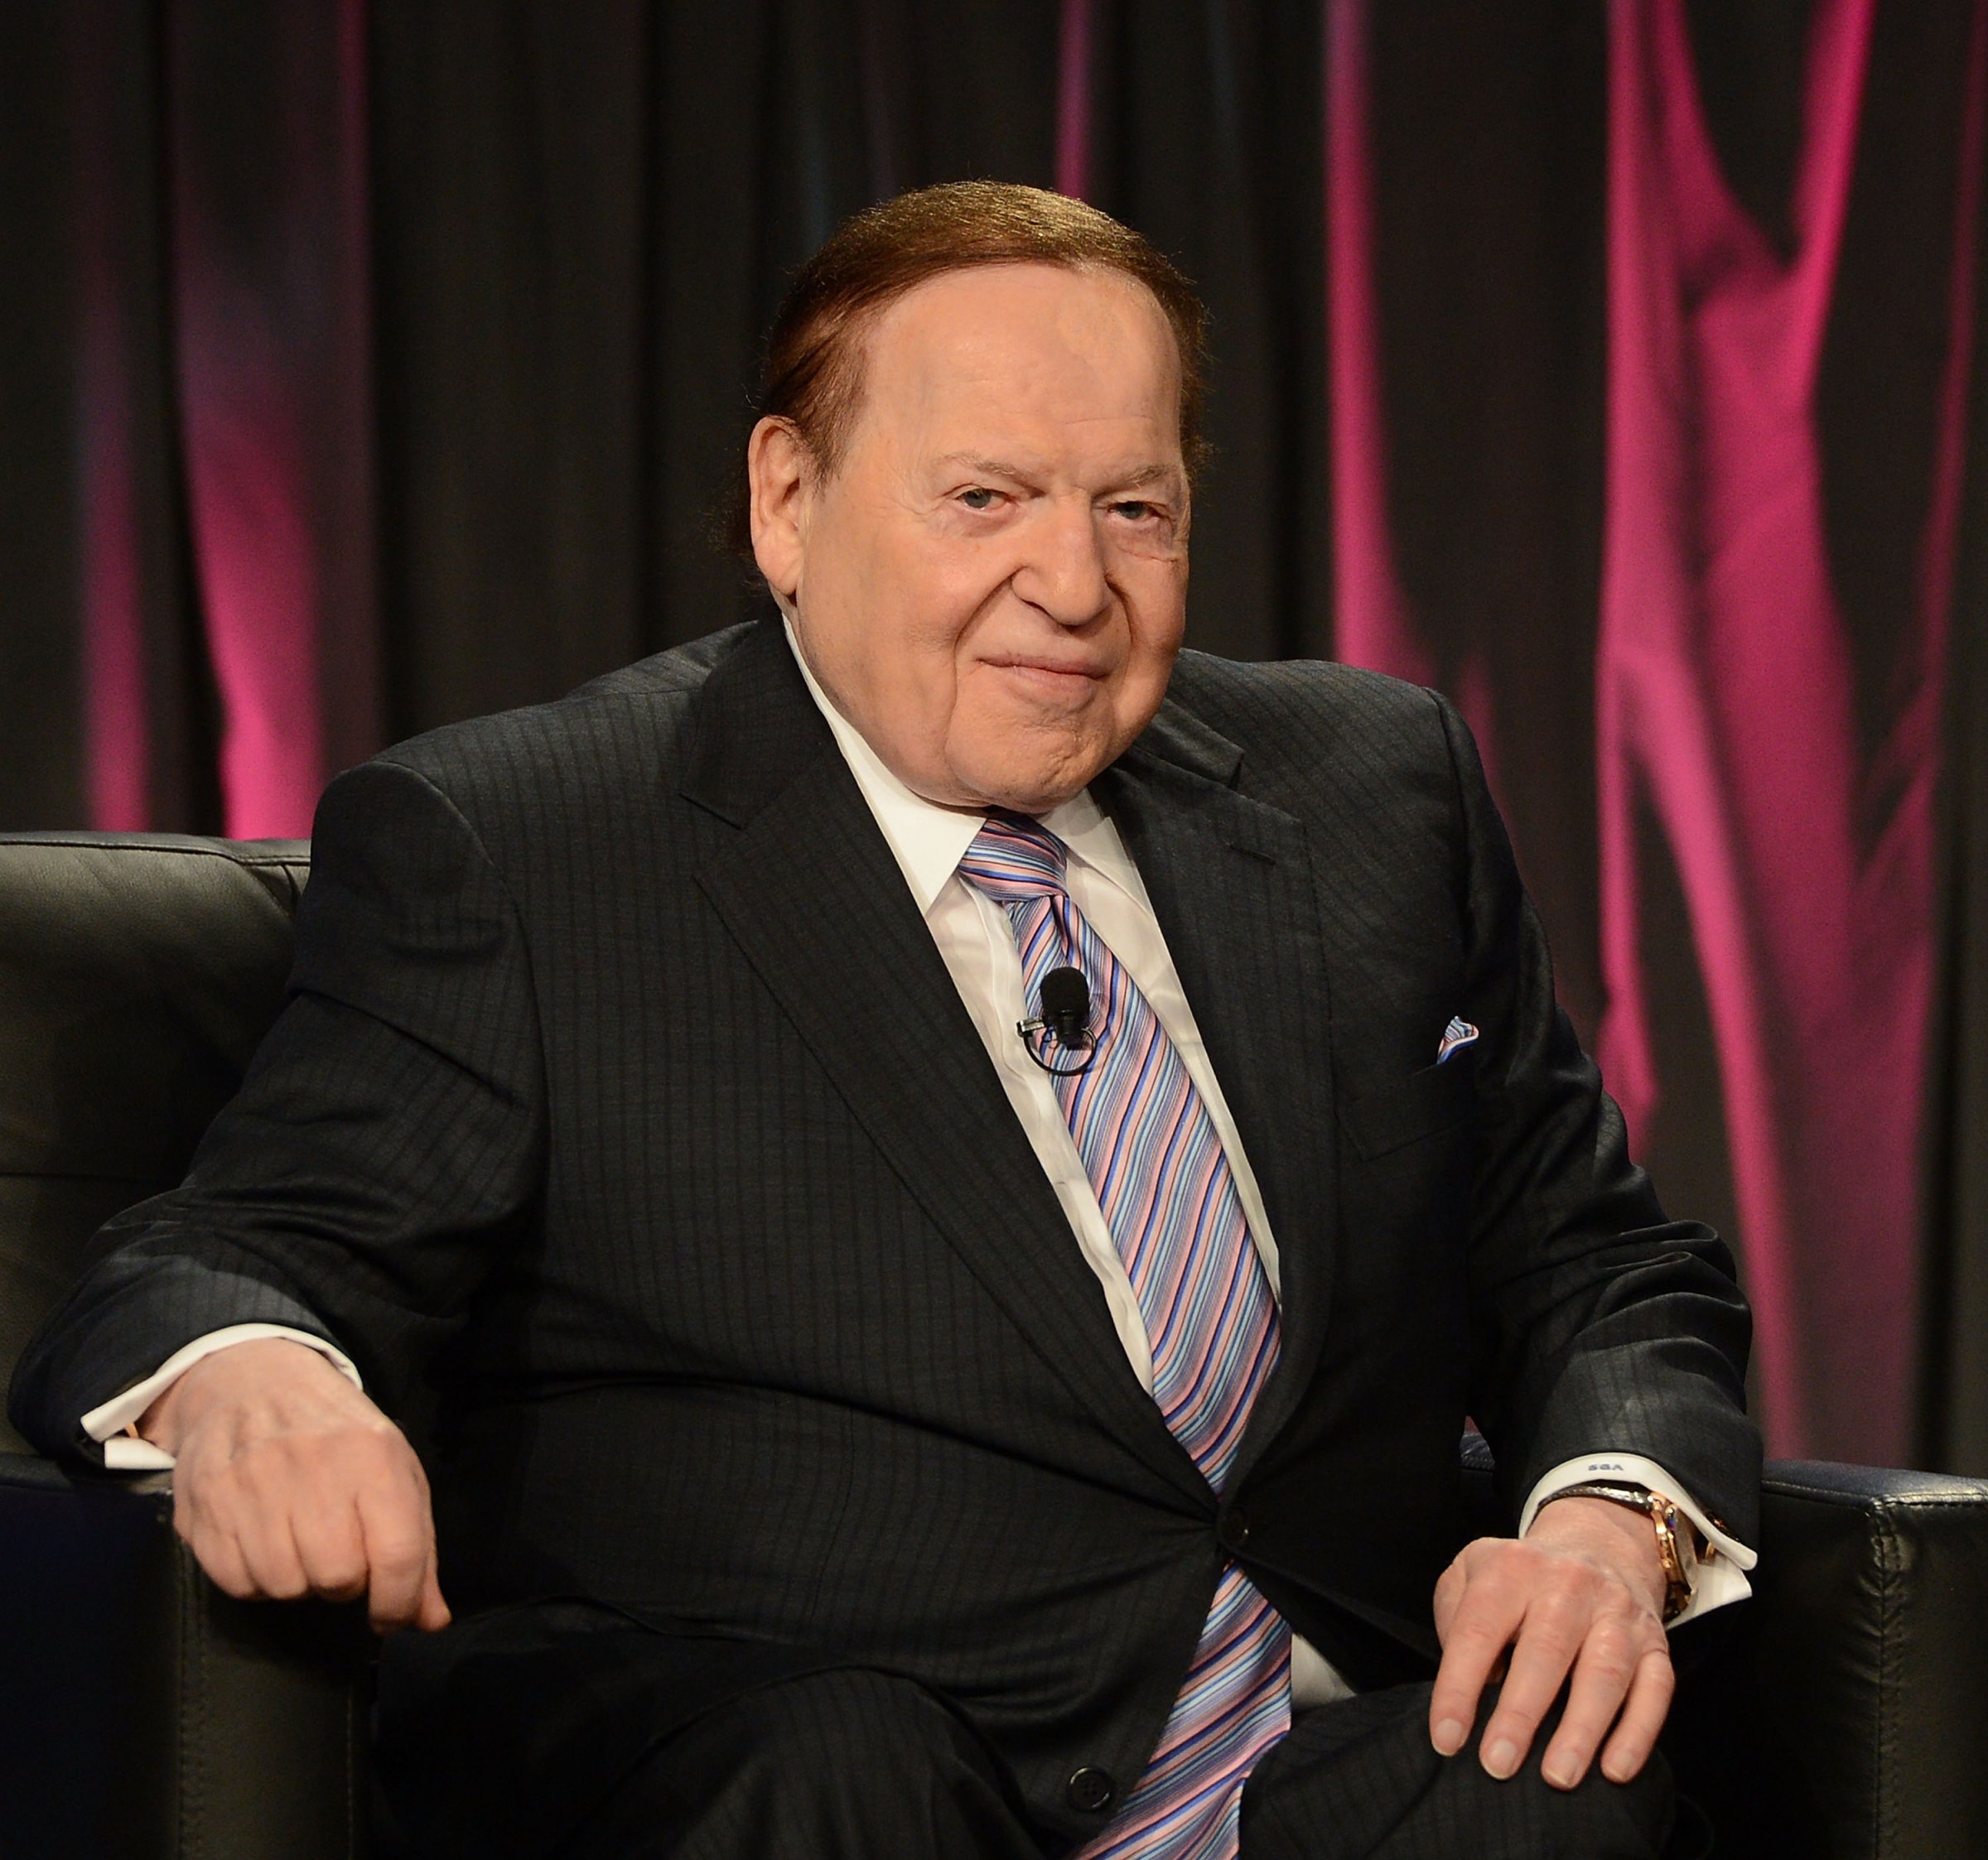 Chairman & CEO of Las Vegas Sands Corp., Sheldon Adelson speaks at the Exclusive Seminar: Keynote at the 14th Annual Global Gaming Expo at the Sands Expo and Convention Center on Oct. 1, 2014 in Las Vegas.